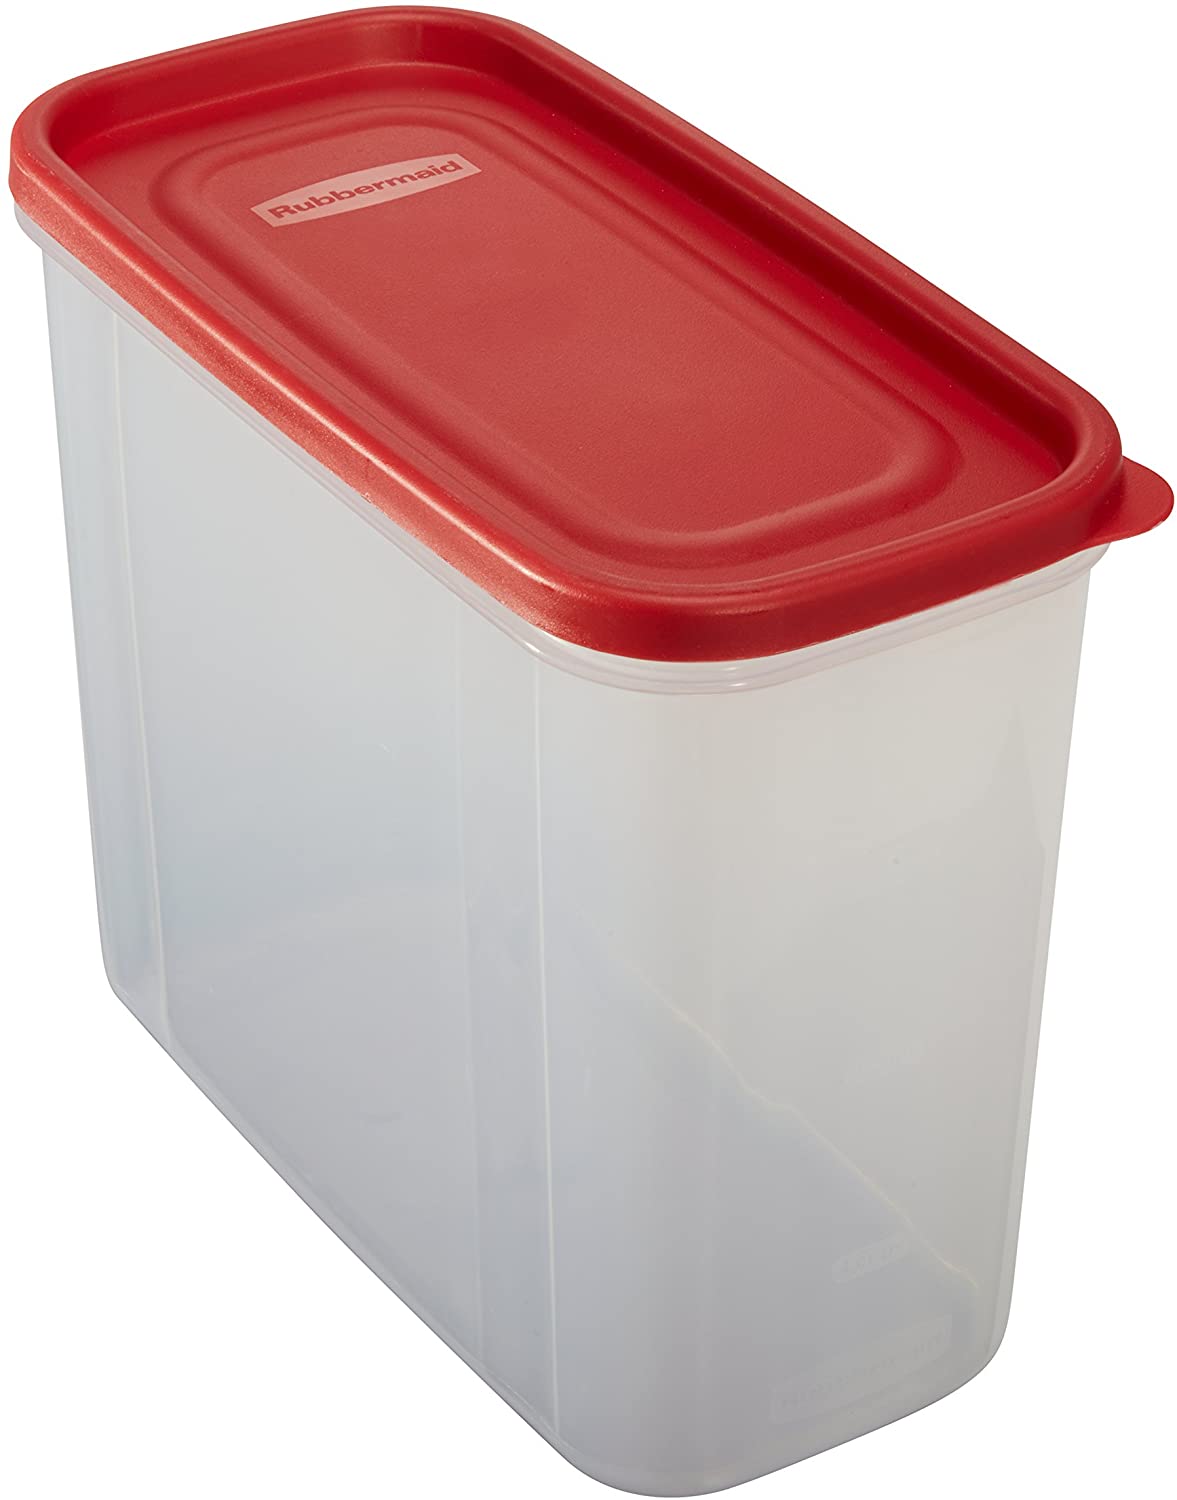 Rubbermaid Dry Food Container, Flour, 3.8 L - Whole and All